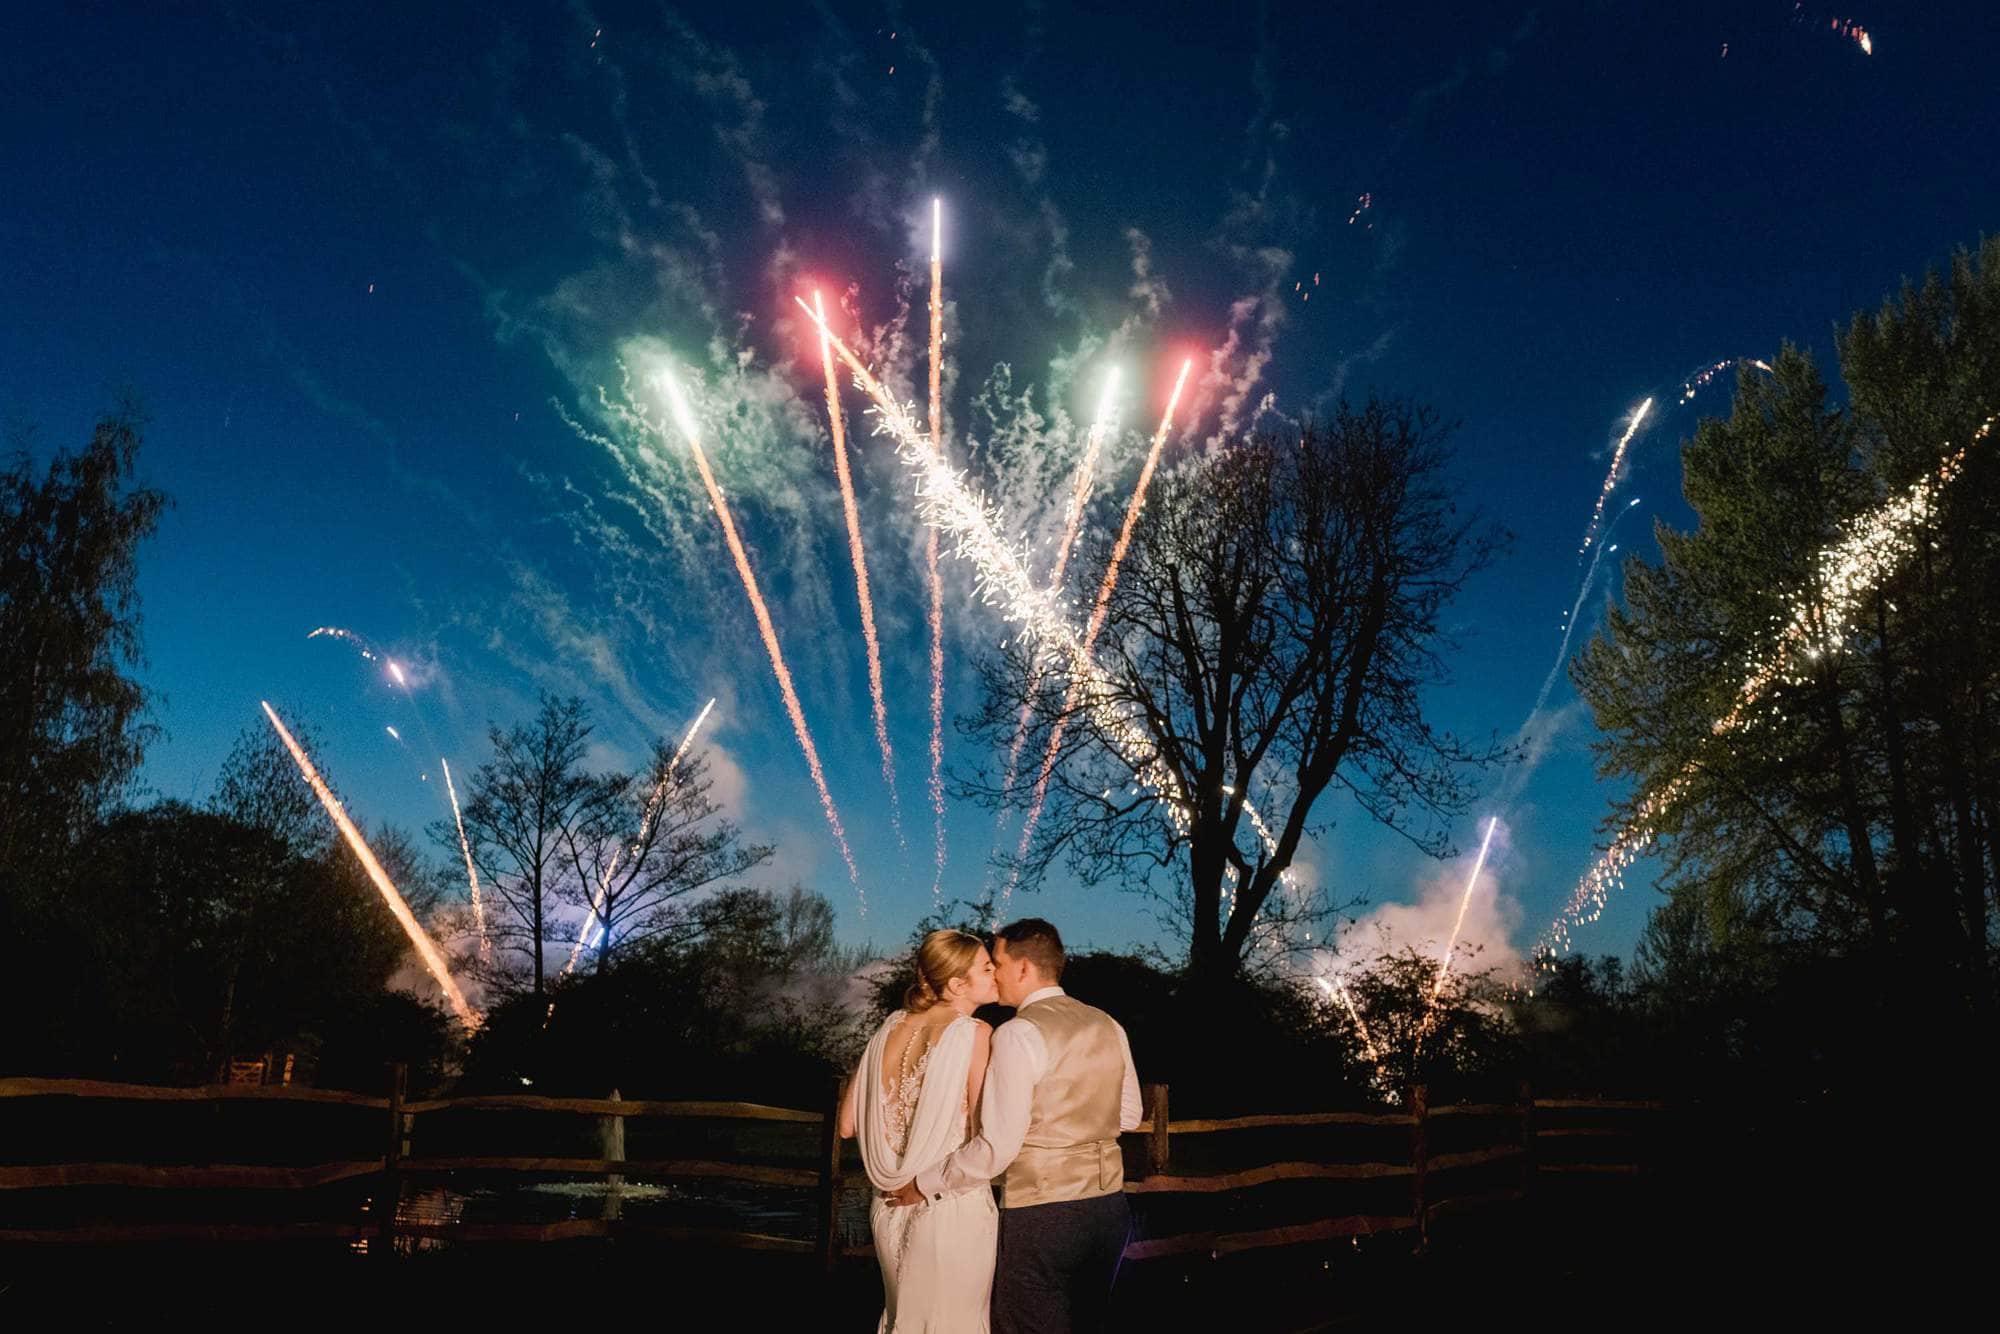 Bride and Groom Watching Fireworks at Coltsford Mill in Surrey